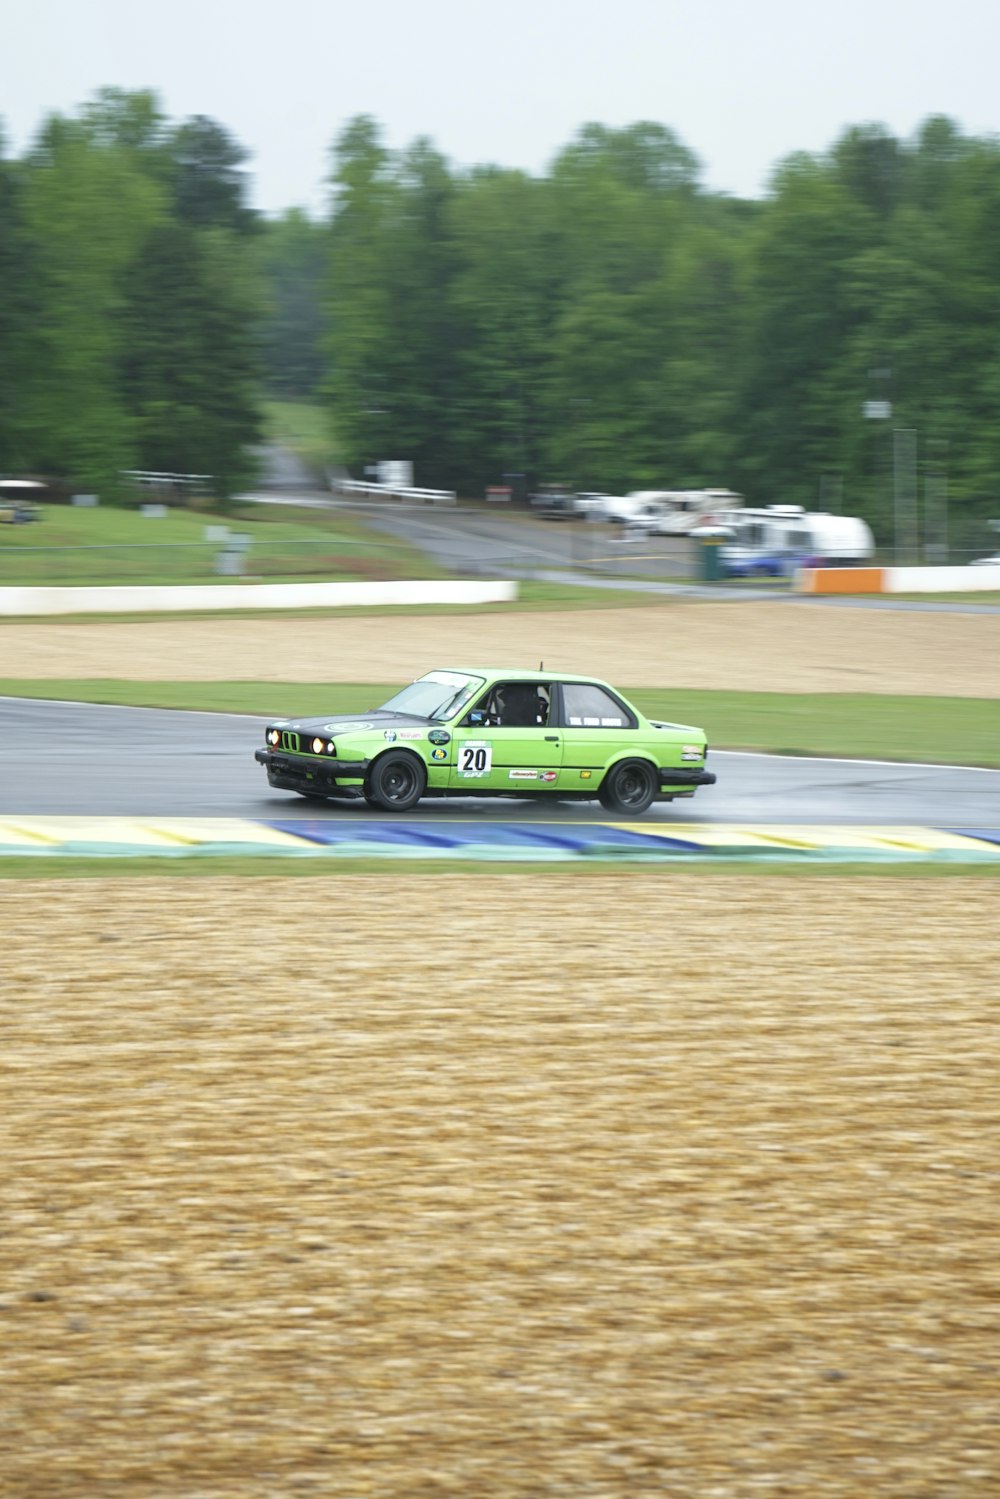 a green car driving down a race track